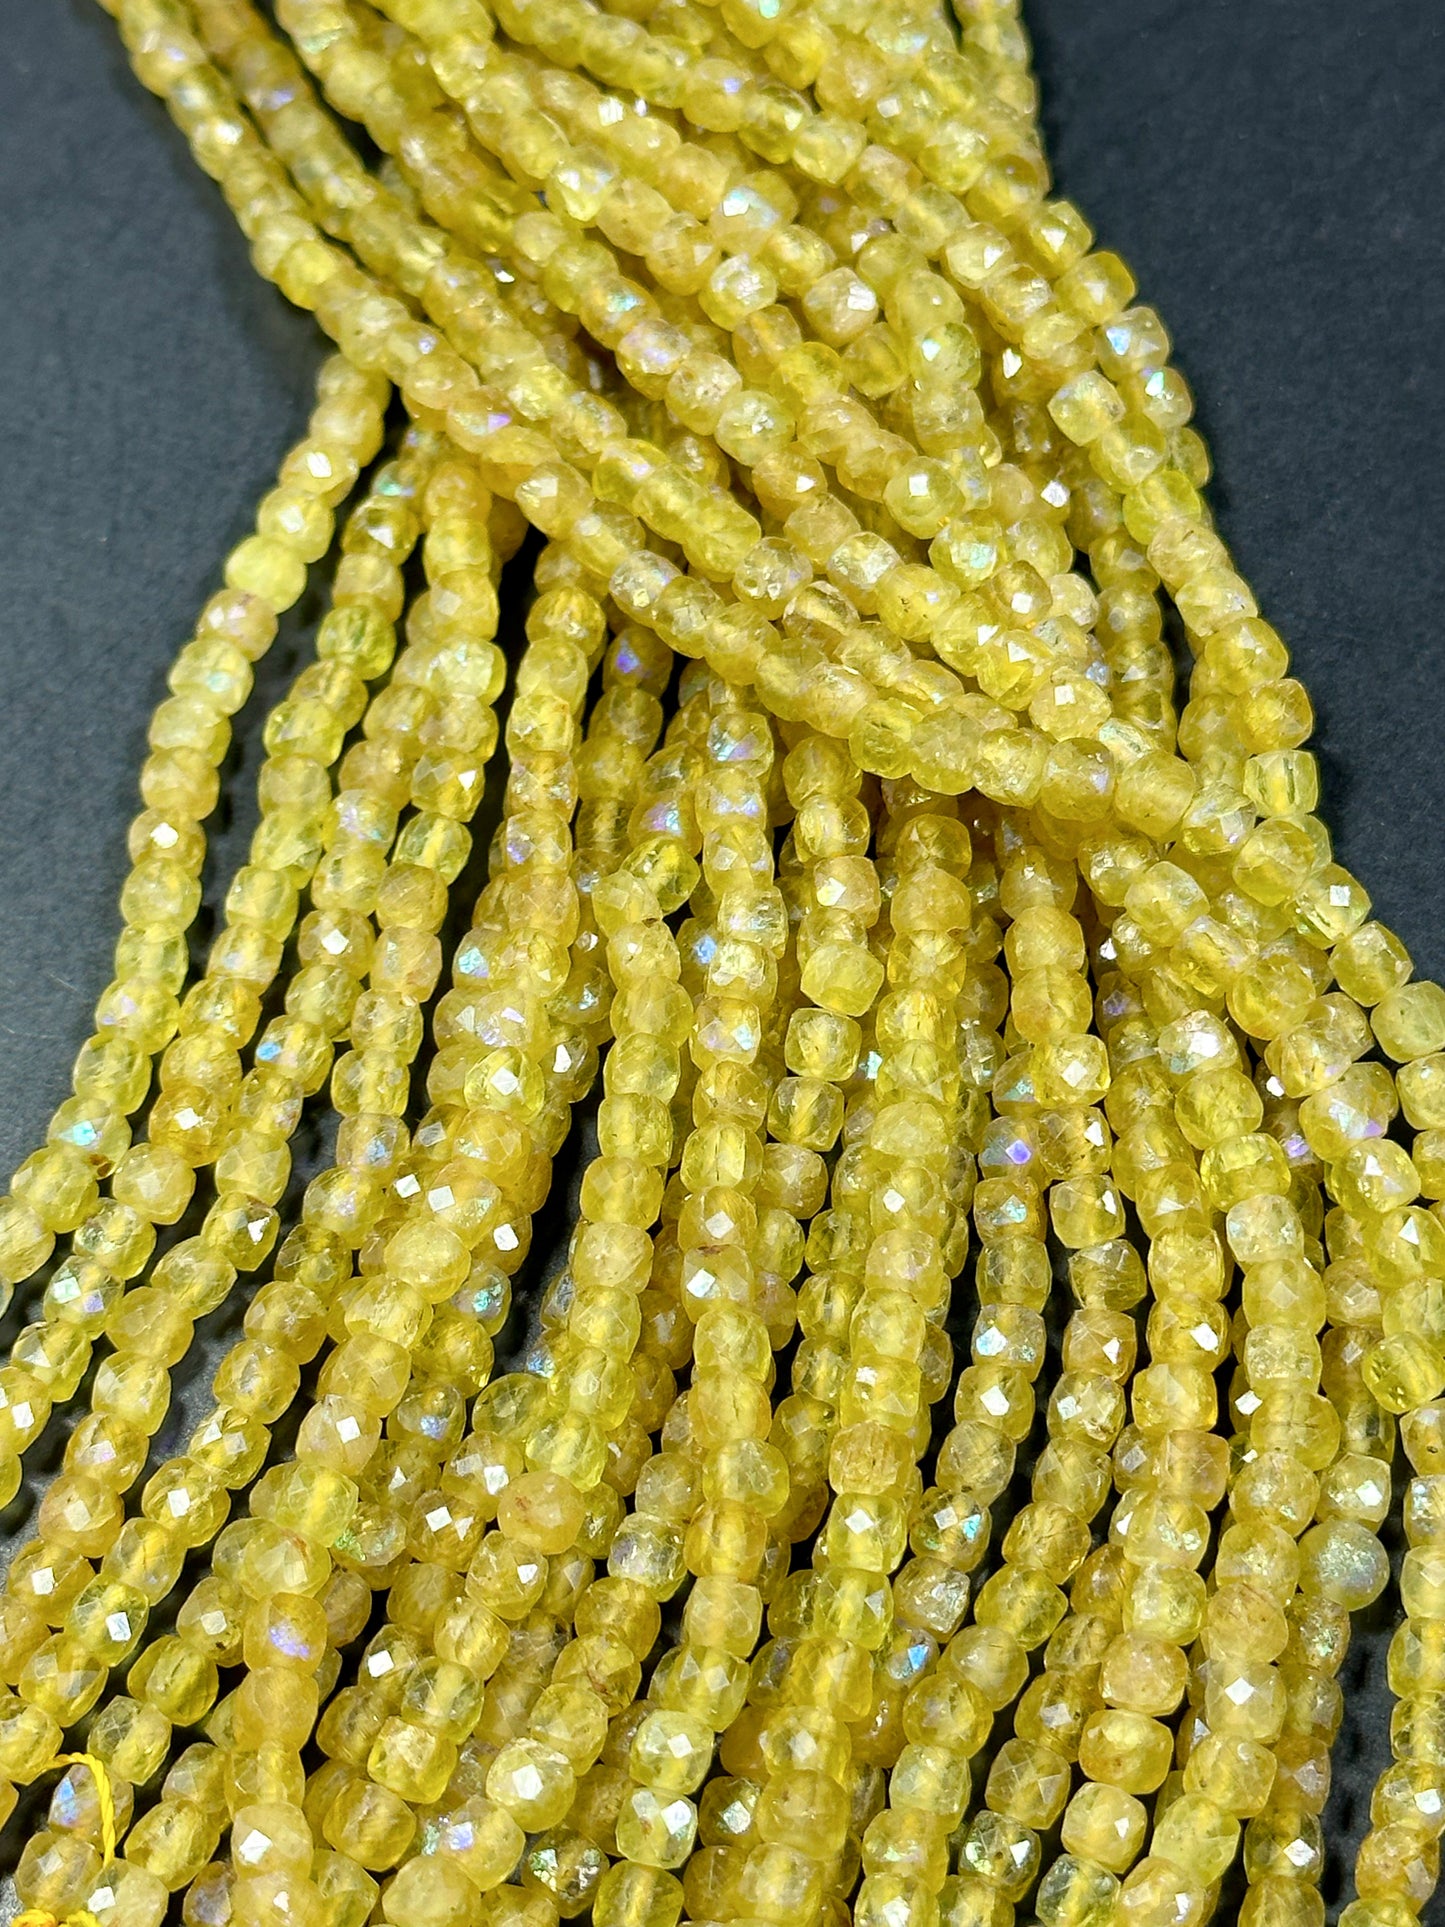 Mystic Natural Yellow Apatite Gemstone Bead Faceted 4mm Cube Shape Bead, Beautiful Yellow Color Loose Mystic Apatite Beads Full Strand 15.5"